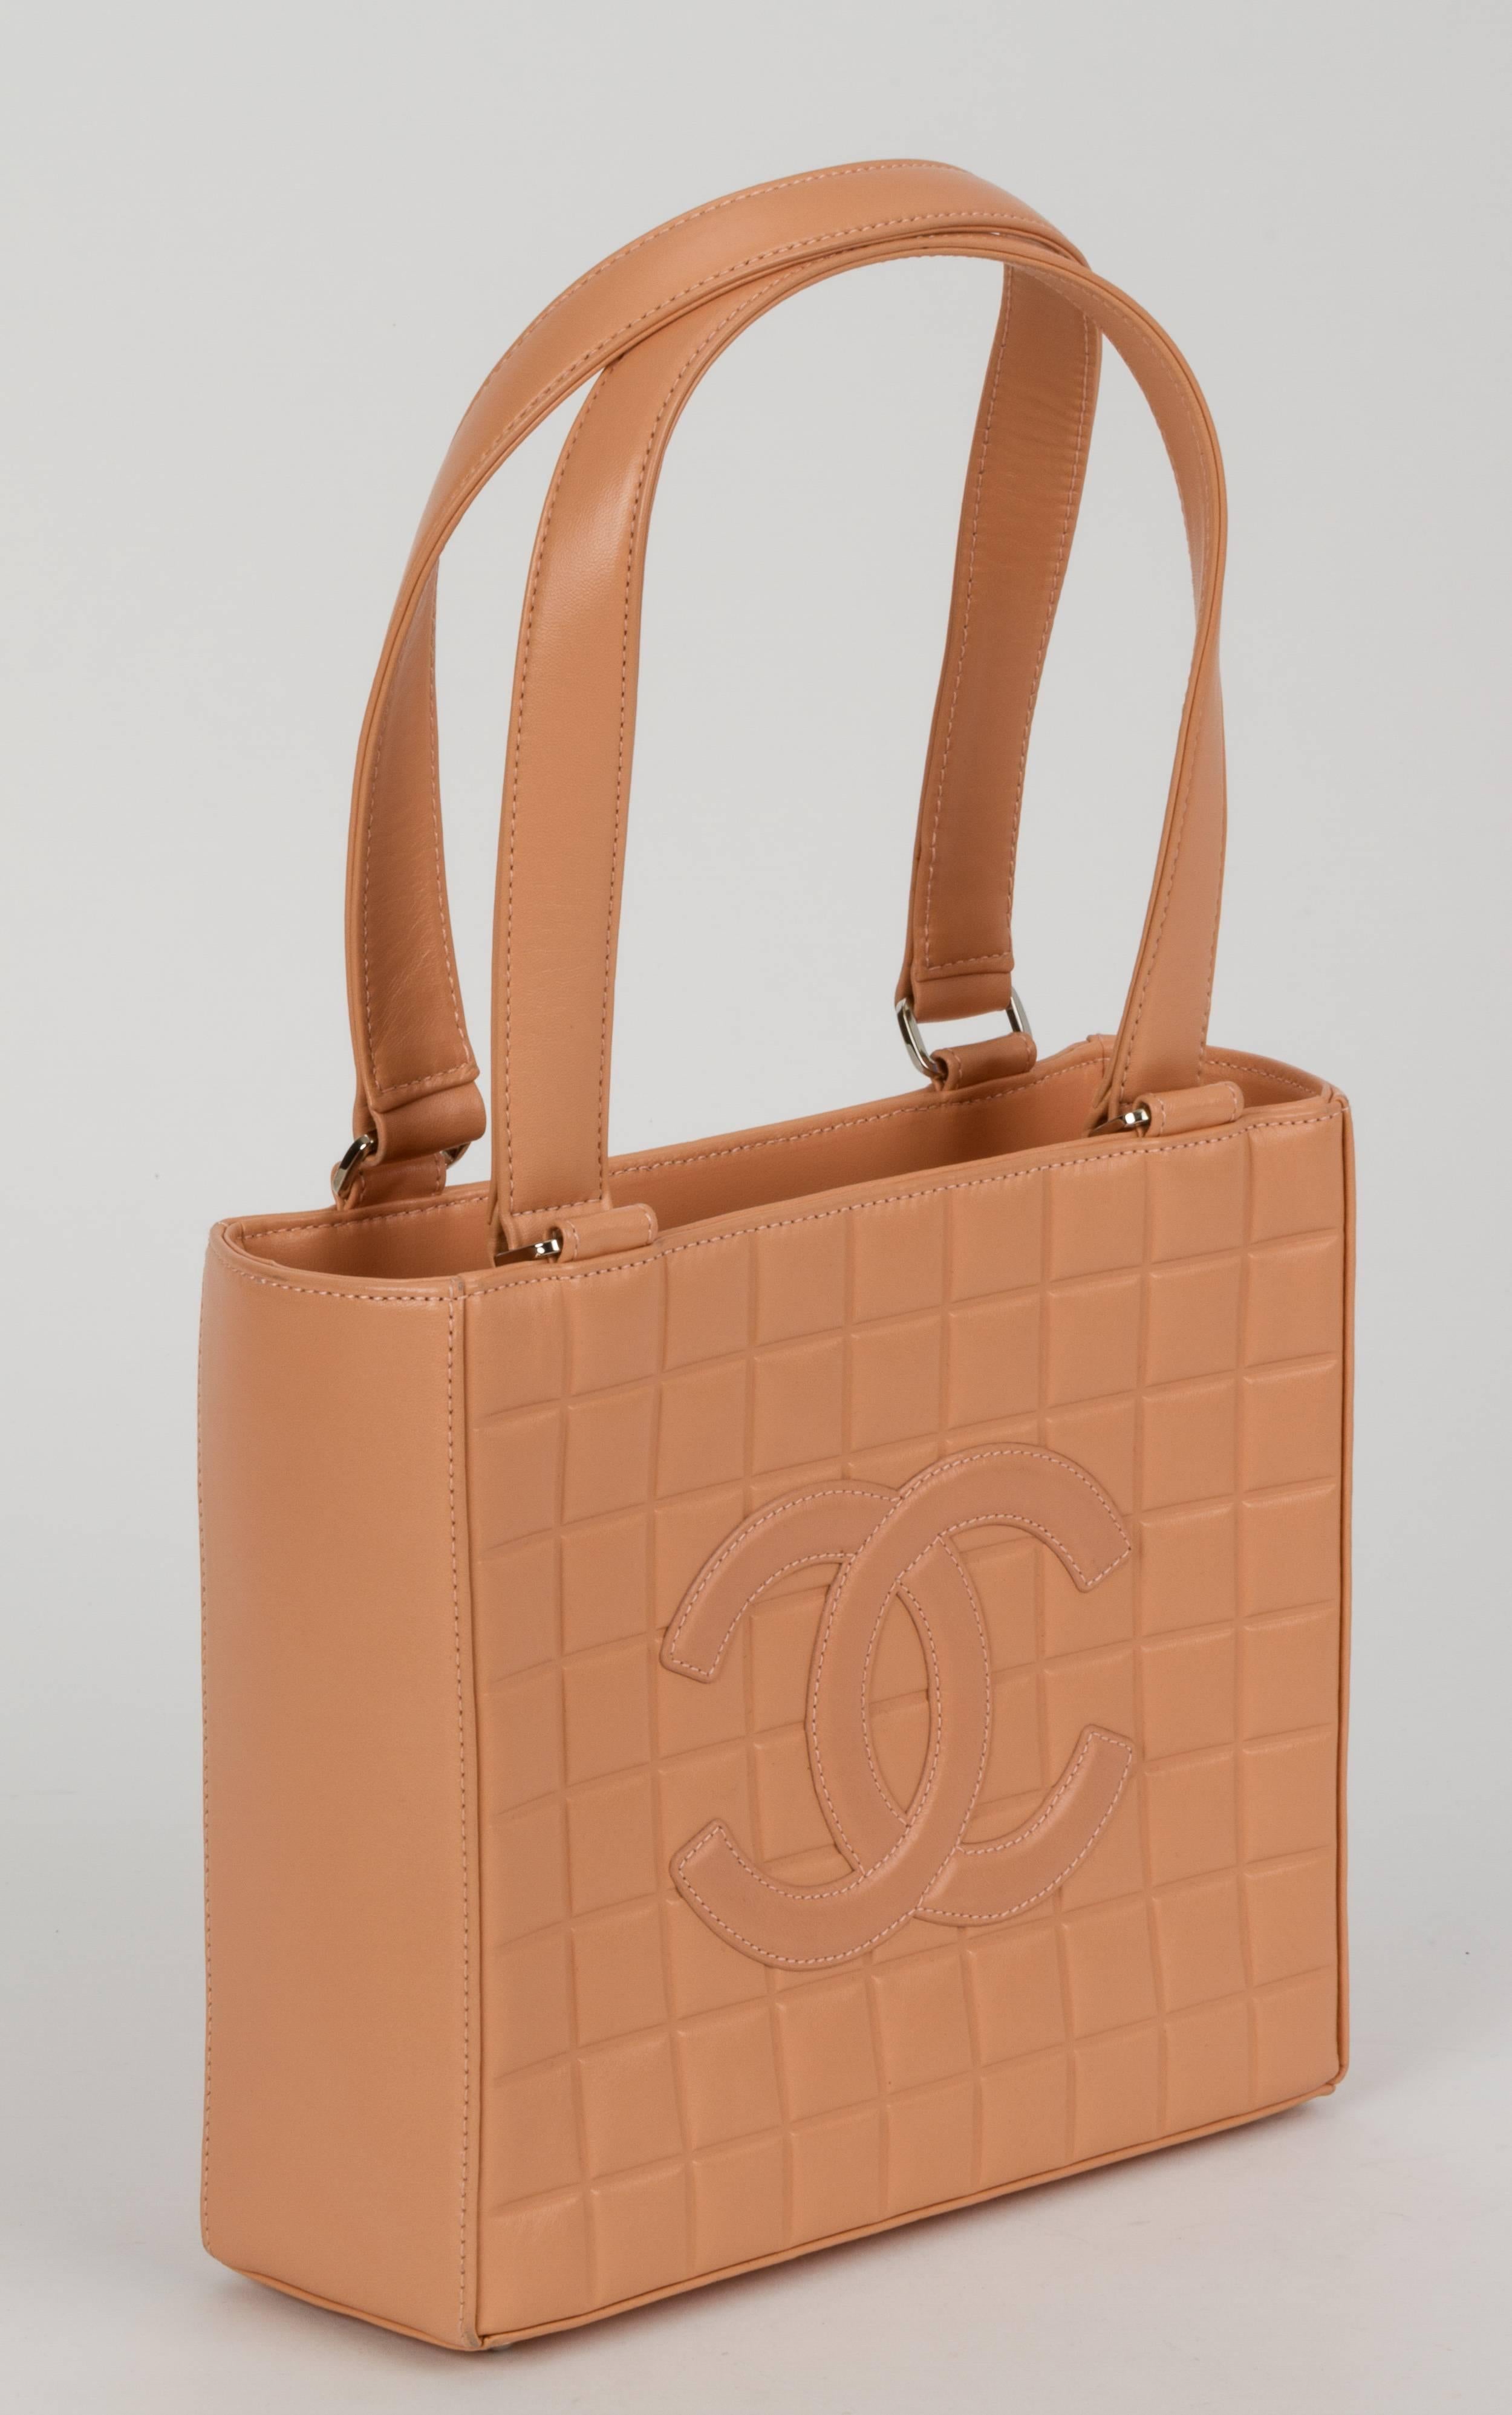 Chanel peach chocolate bar design quilted shoulder tote.Great condition, comes with seal, ID card holder, booklet and dust bag. Handle drop, 9"L.
